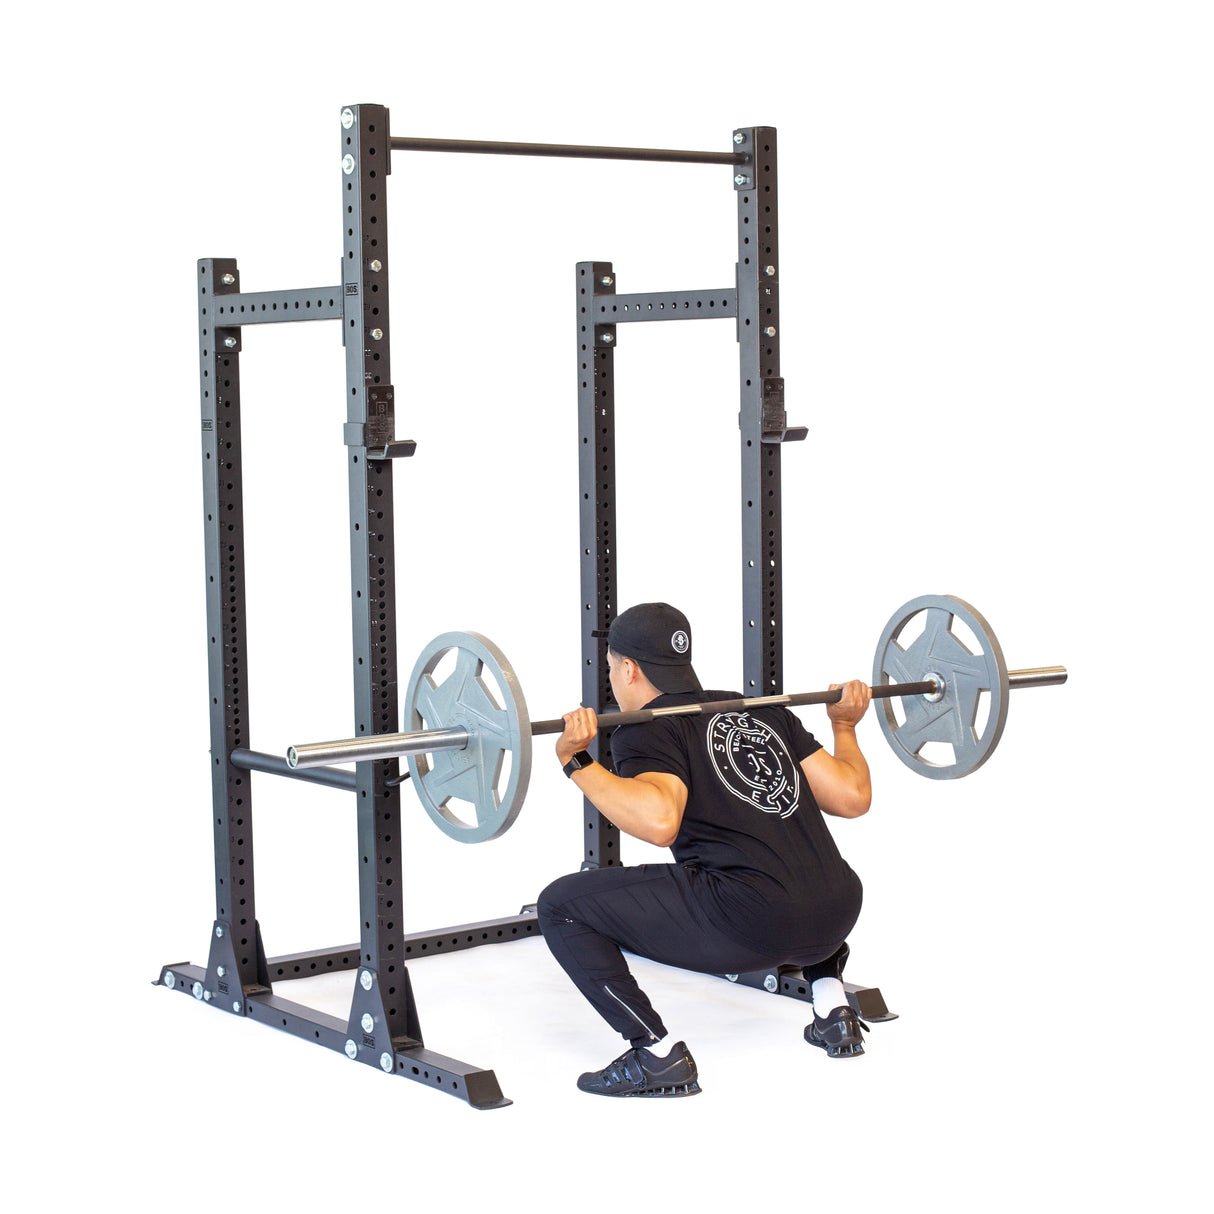 Product picture of Hydra Half Rack PREBUILT with a male model performing squats